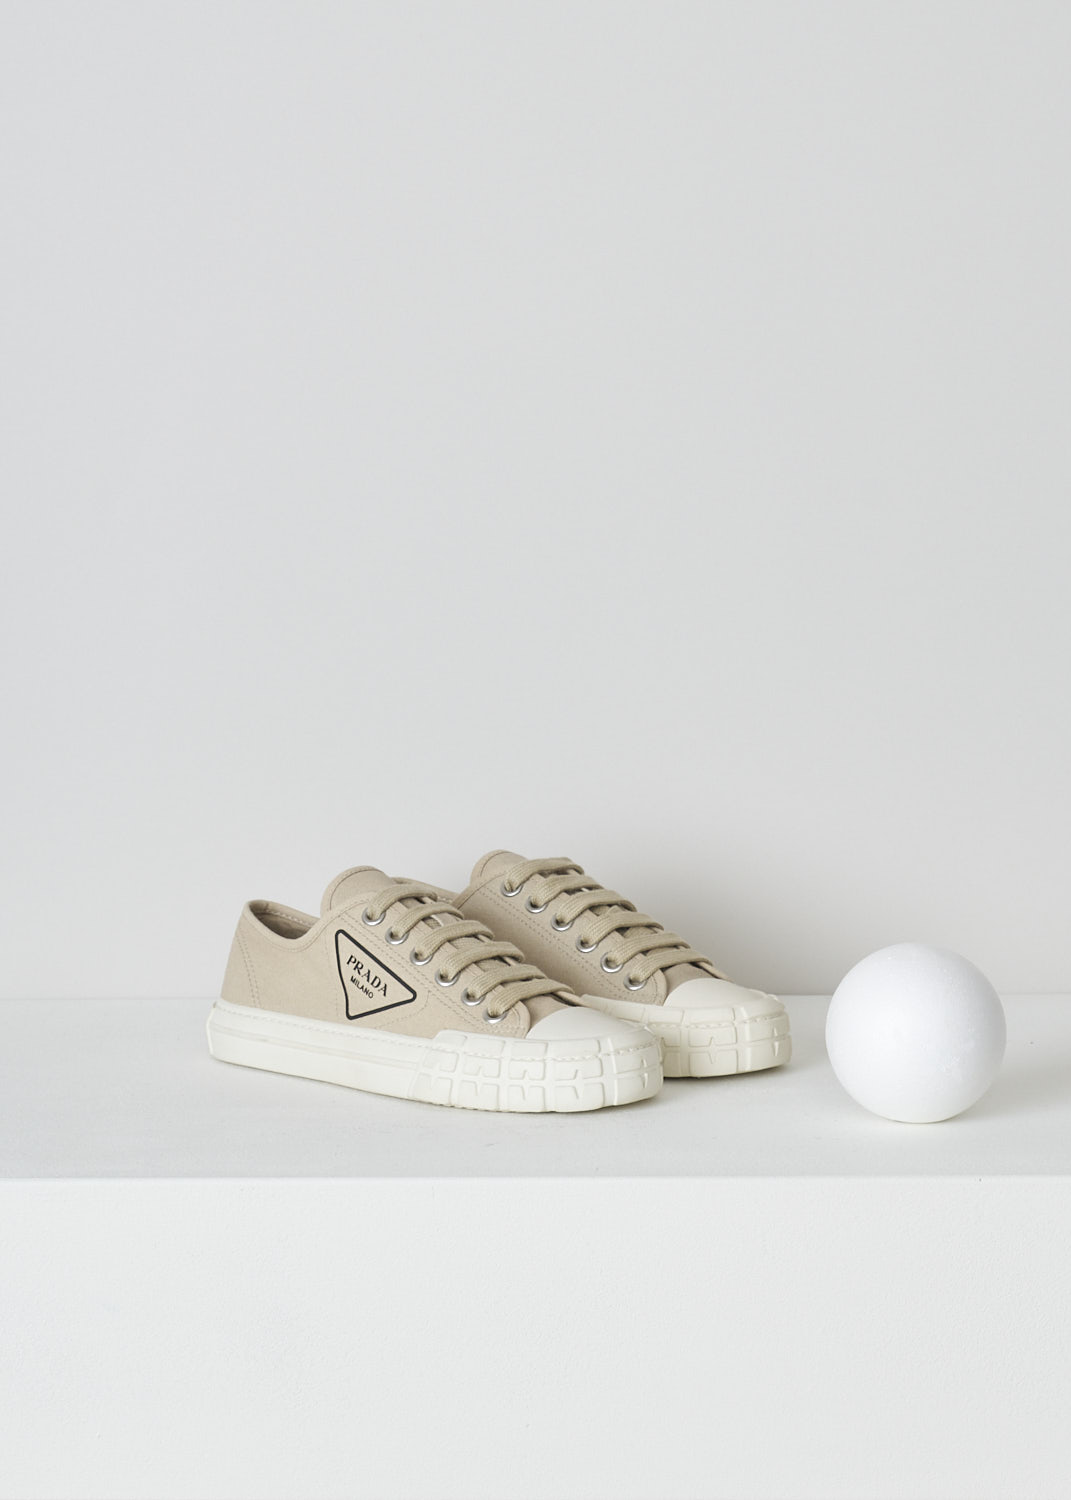 PRADA, BEIGE LOW TOP CANVAS SNEAKERS, 1E231M_2OFZ_F0065_CORDA, Beige, Front, These low top beige canvas sneakers feature a front lace-up fastening with laces in the same beige color. The brand's triangle logo can be found on the side in black rubber. These sneakers have a round toe with a white rubber toe cap and ribbed rubber soles. 
